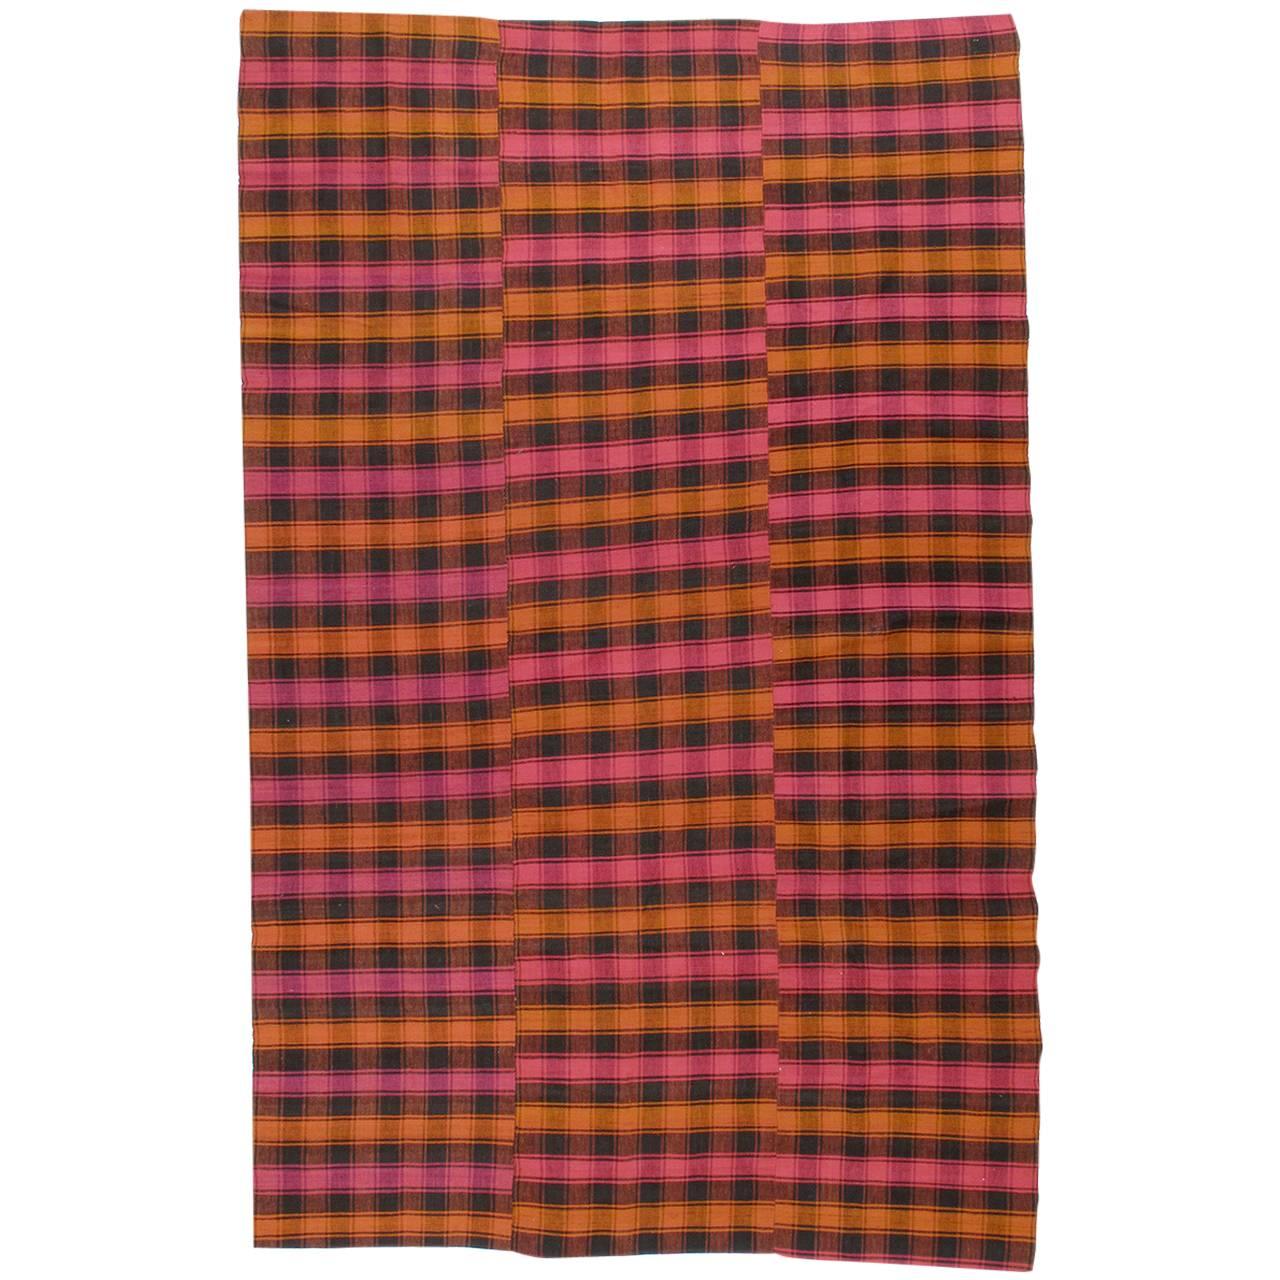 Plaid Cover Rug For Sale